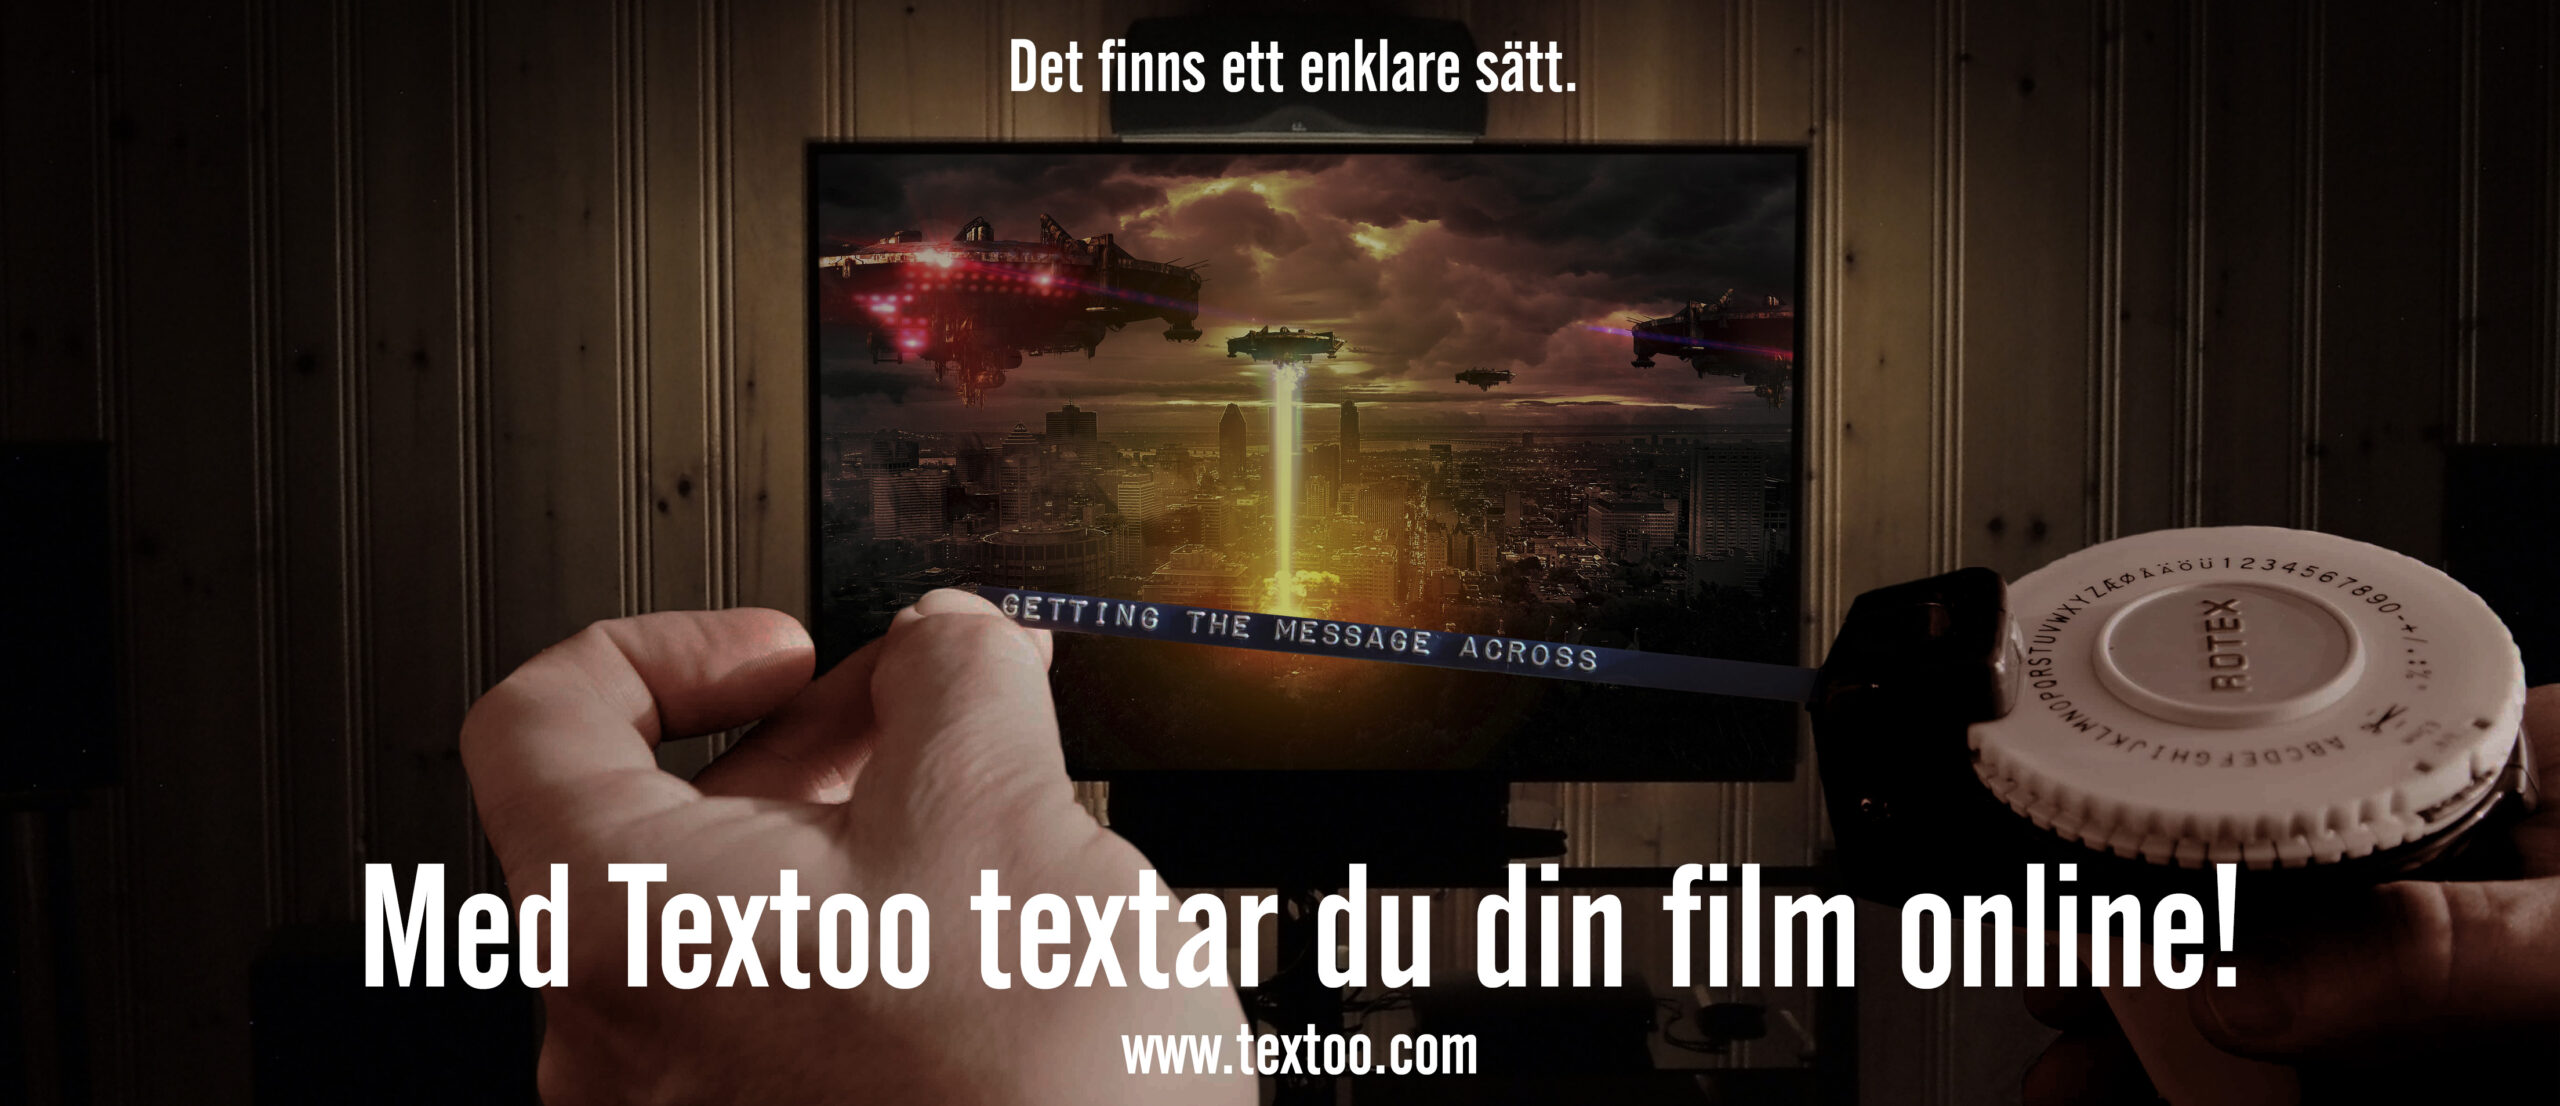 Textoo annons